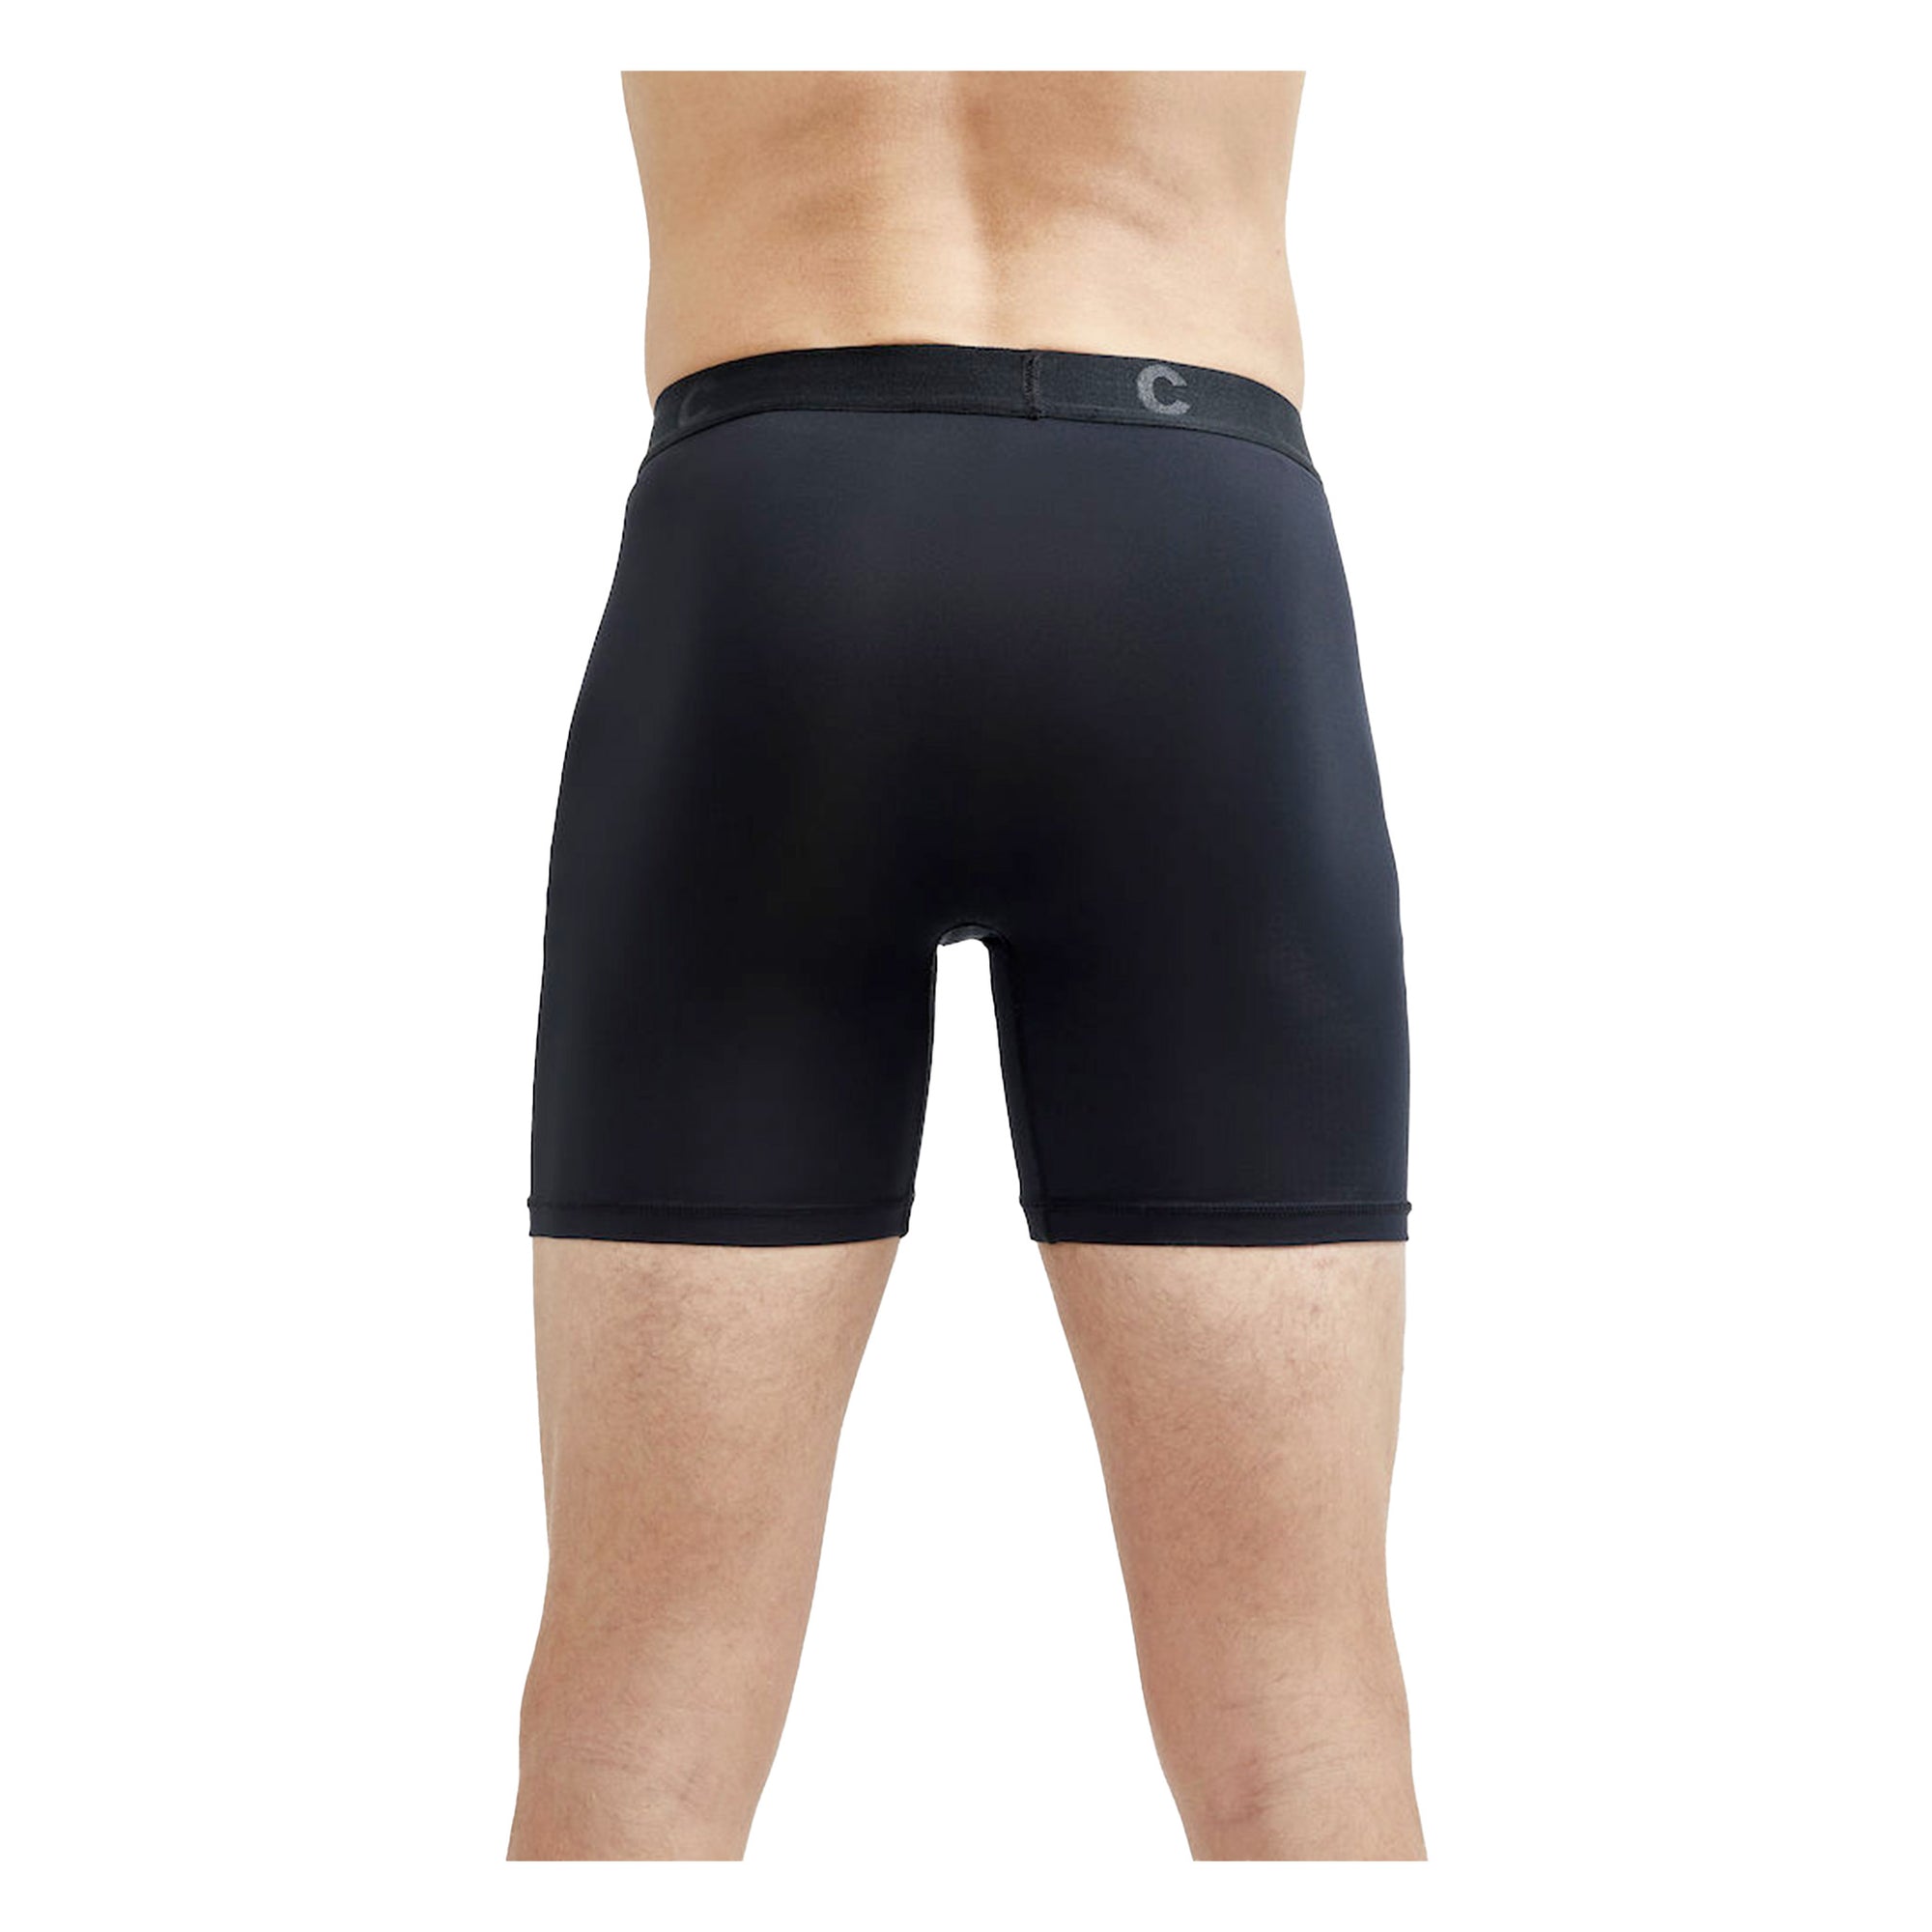 CRAFT CORE DRY BOXER 6-INCH 2-PACK - MEN